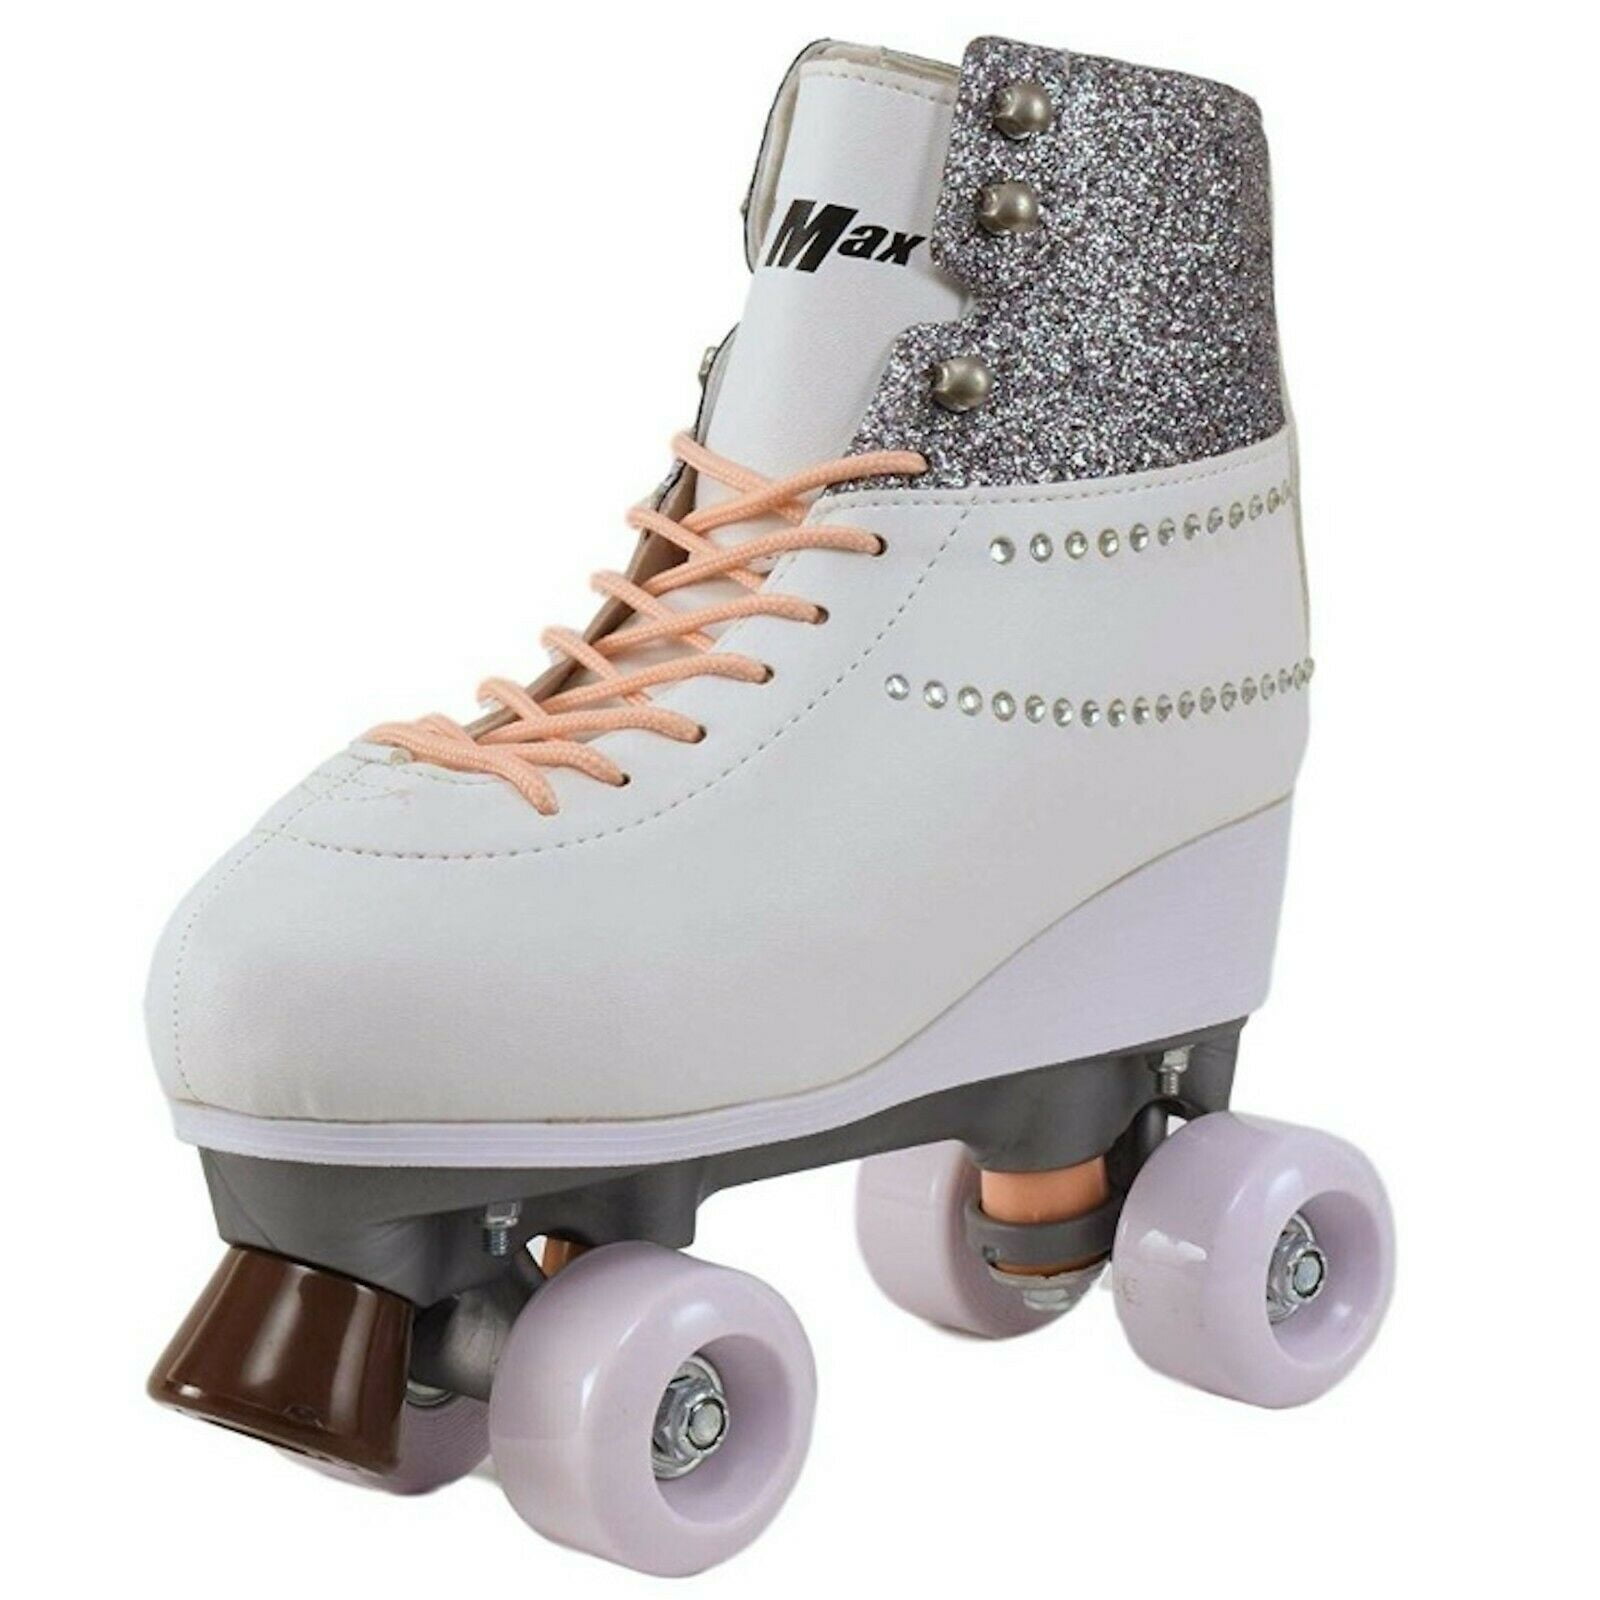 Skates for Girls Size 6.5 Quad Derby White Purple Pink Youth STMAX 